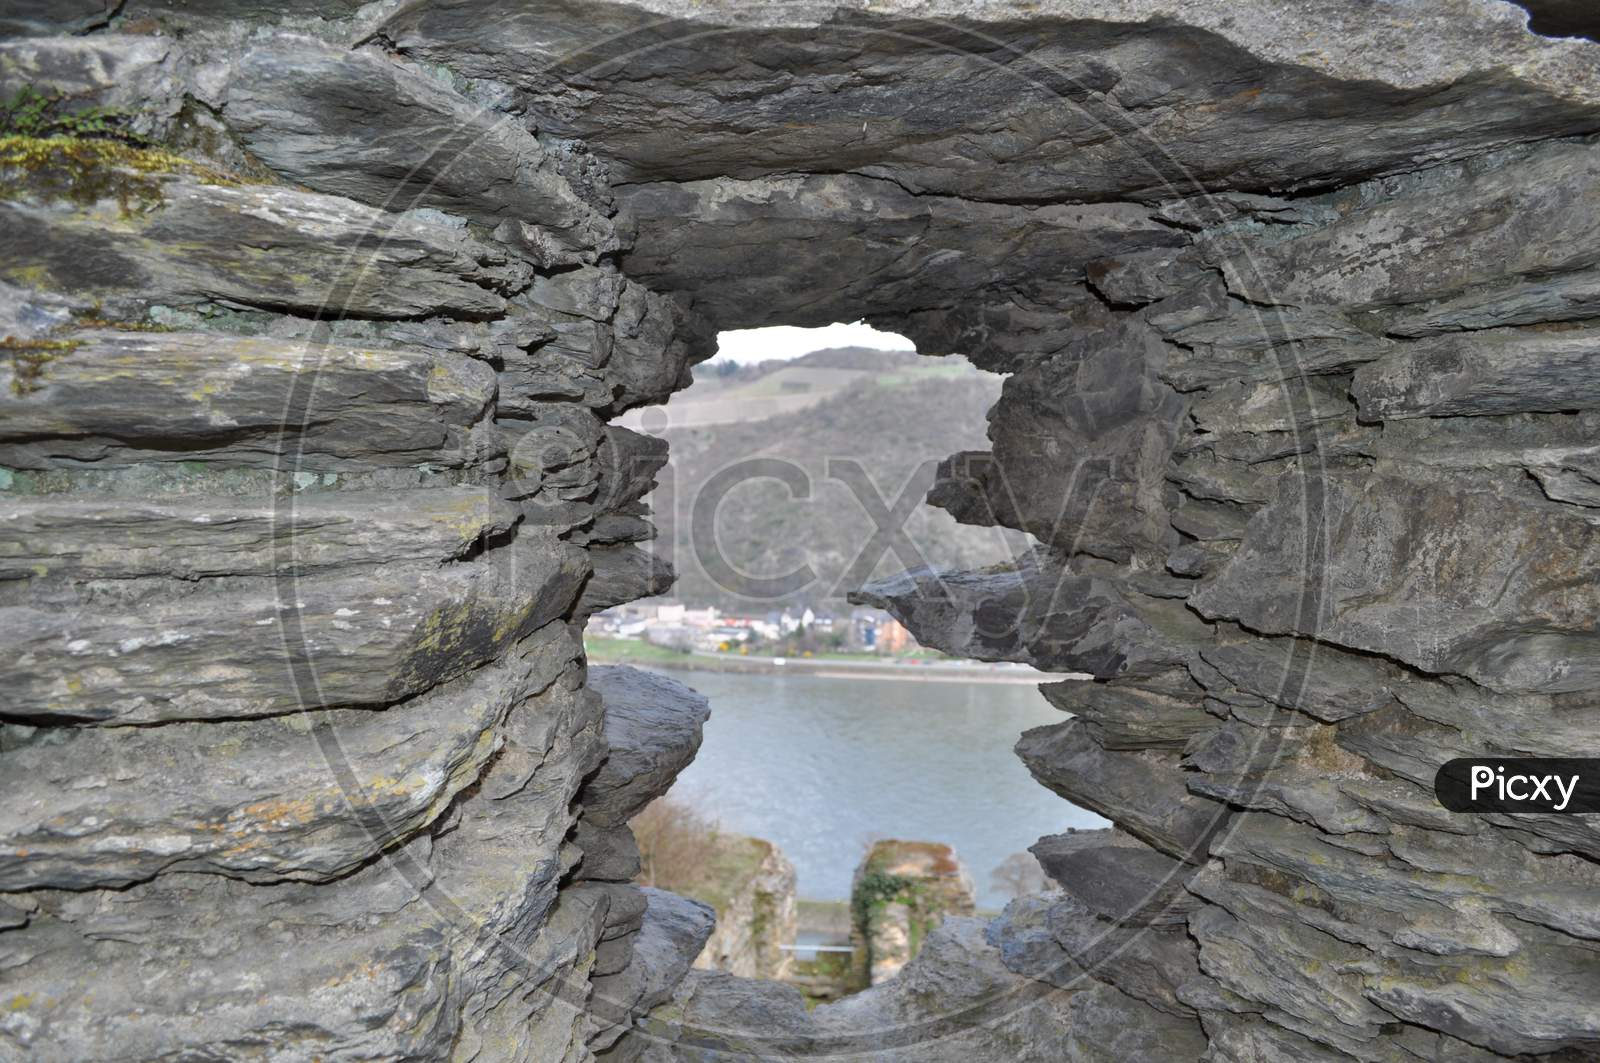 View through a hole in the wall